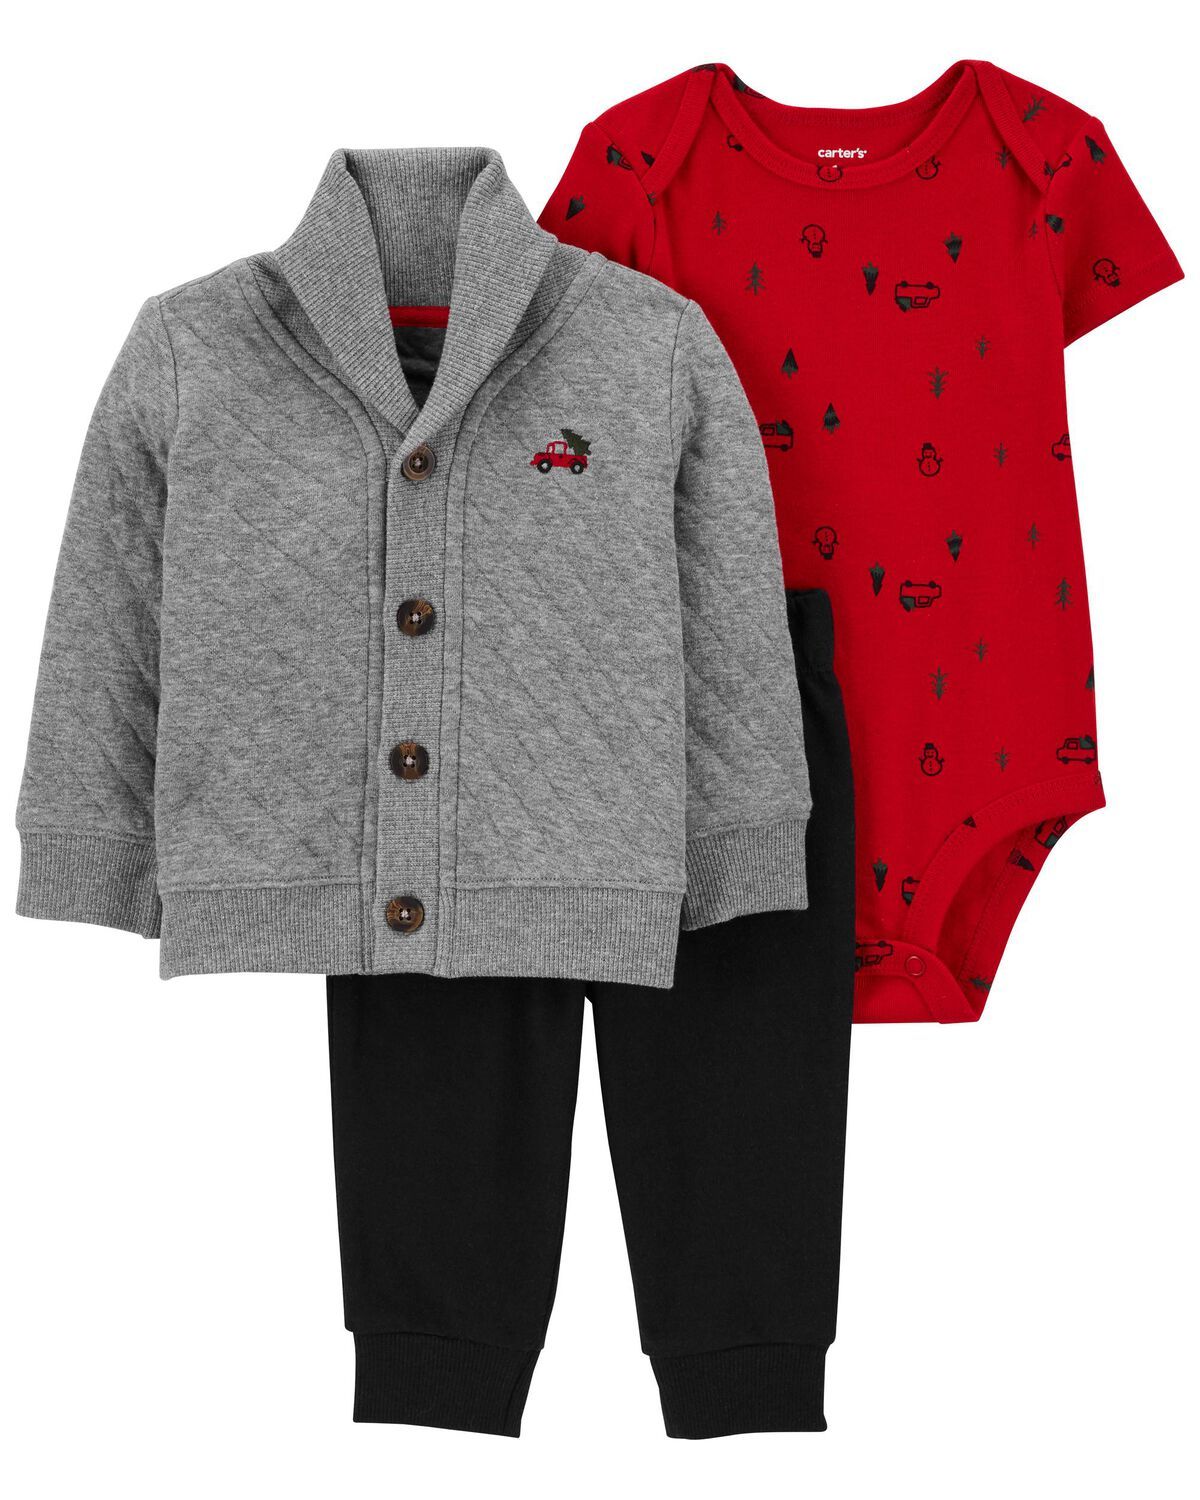 Grey/Red/Black Baby 3-Piece Double Knit Sweater Set | carters.com | Carter's